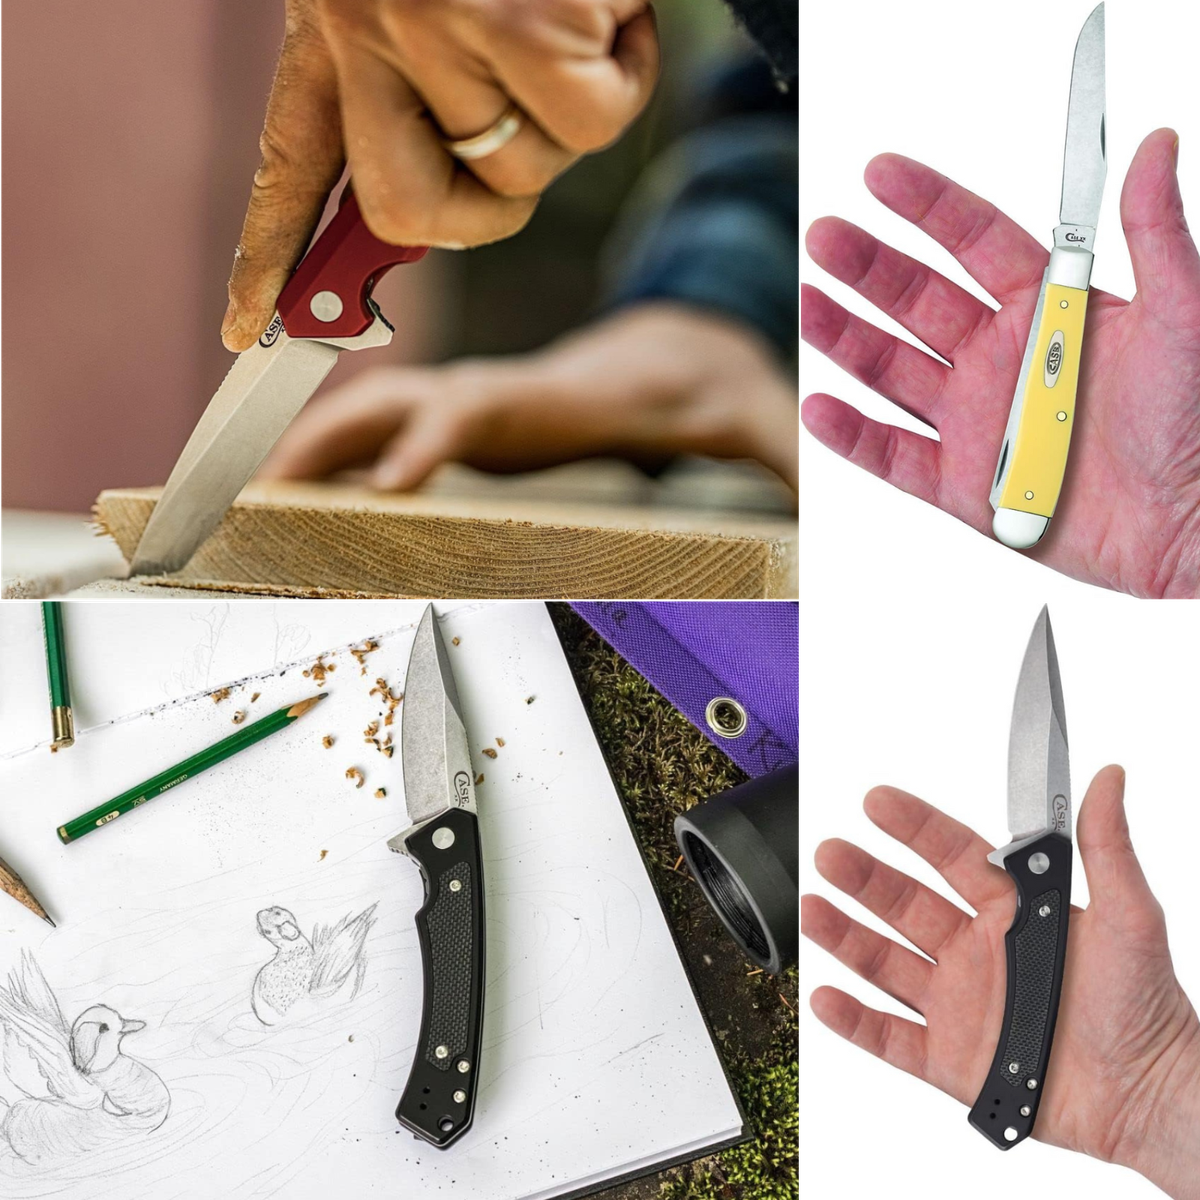 A man cutting on a board, a knife being used for sharpening drawing pencils on a sketch pad, and 2 pics of knives in a hand.